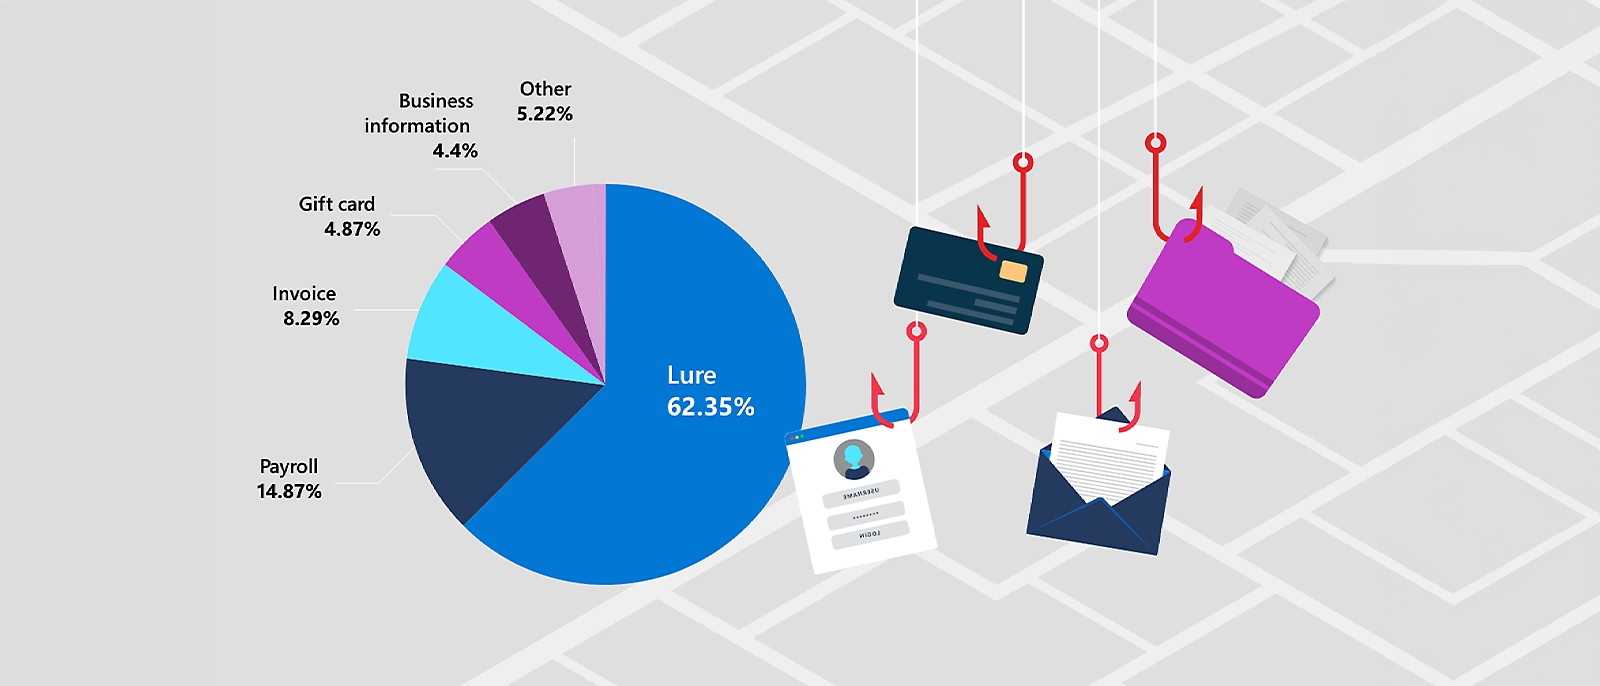 Pie chart showing categories: Business, Other, Gift card, Invoice, Lure, Payroll with percentages